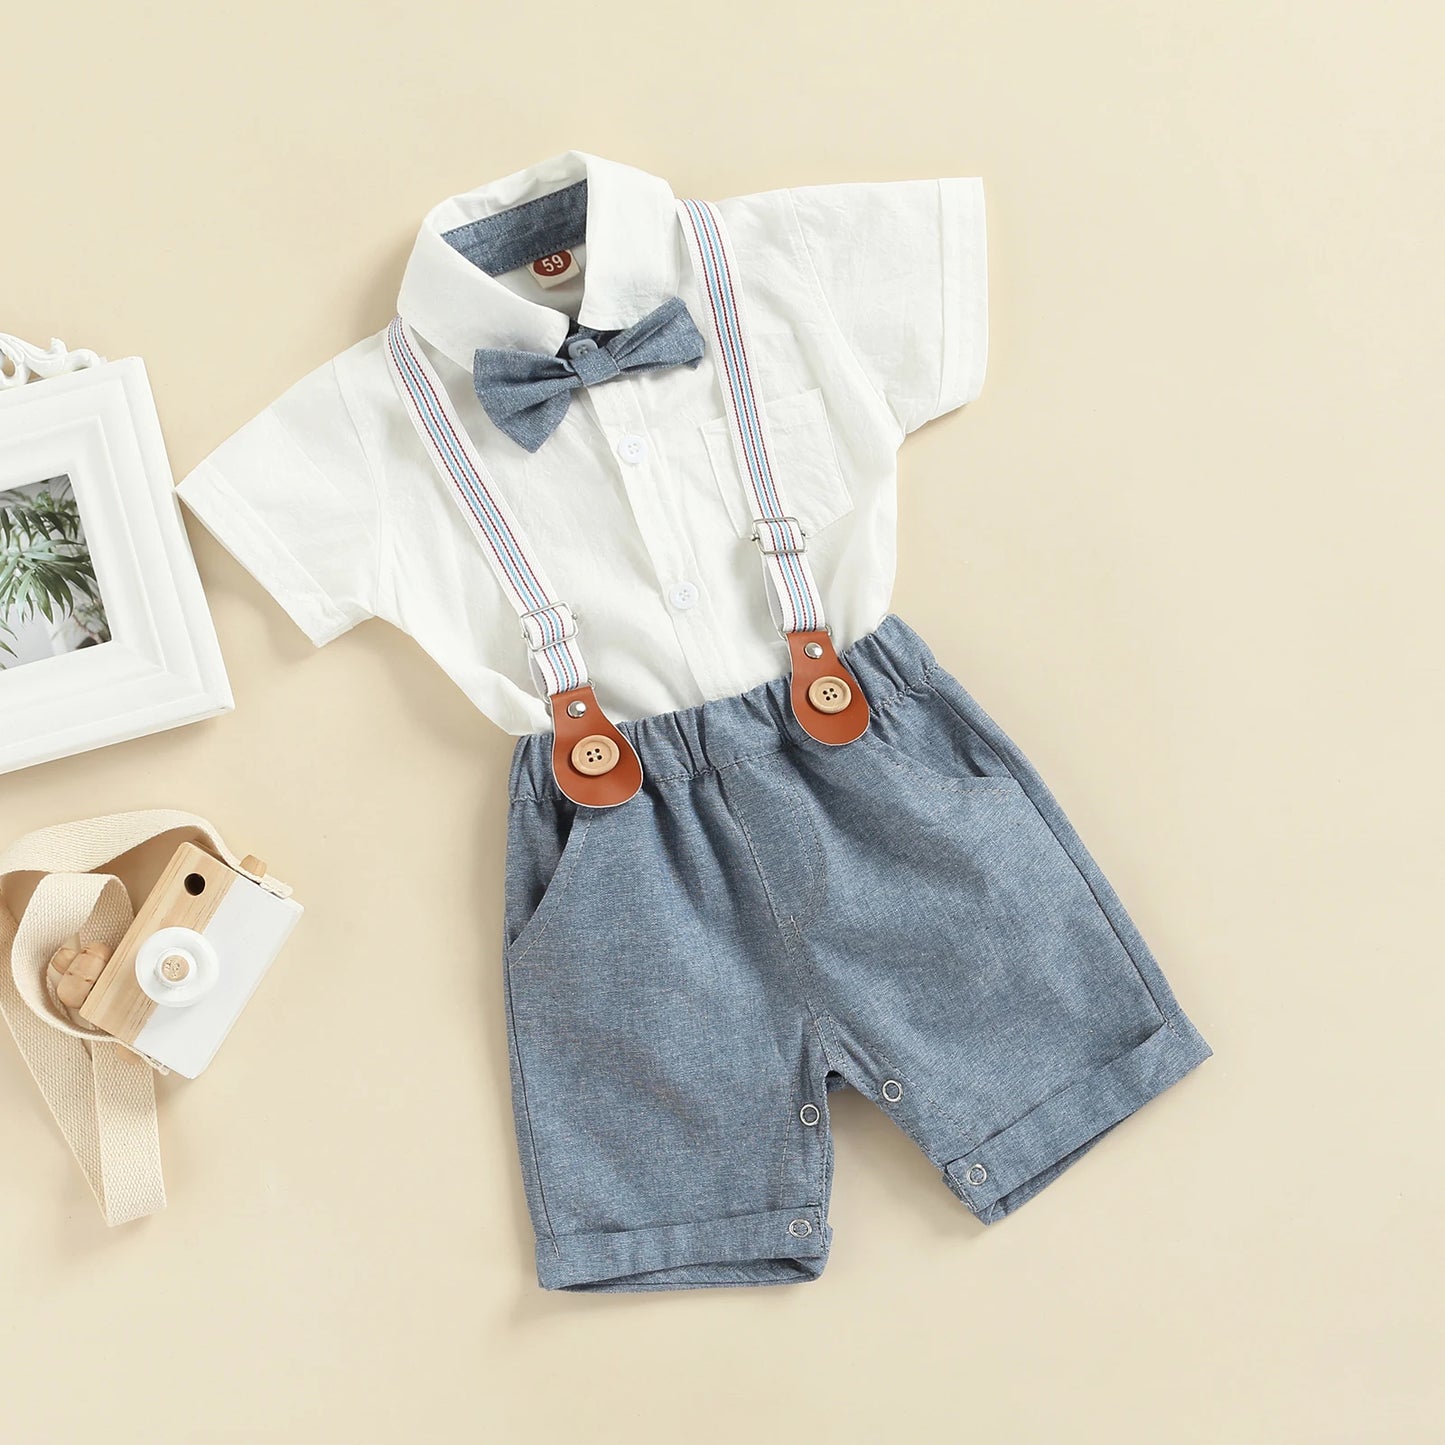 Baby Boys Short-Sleeve Tops with Suspender